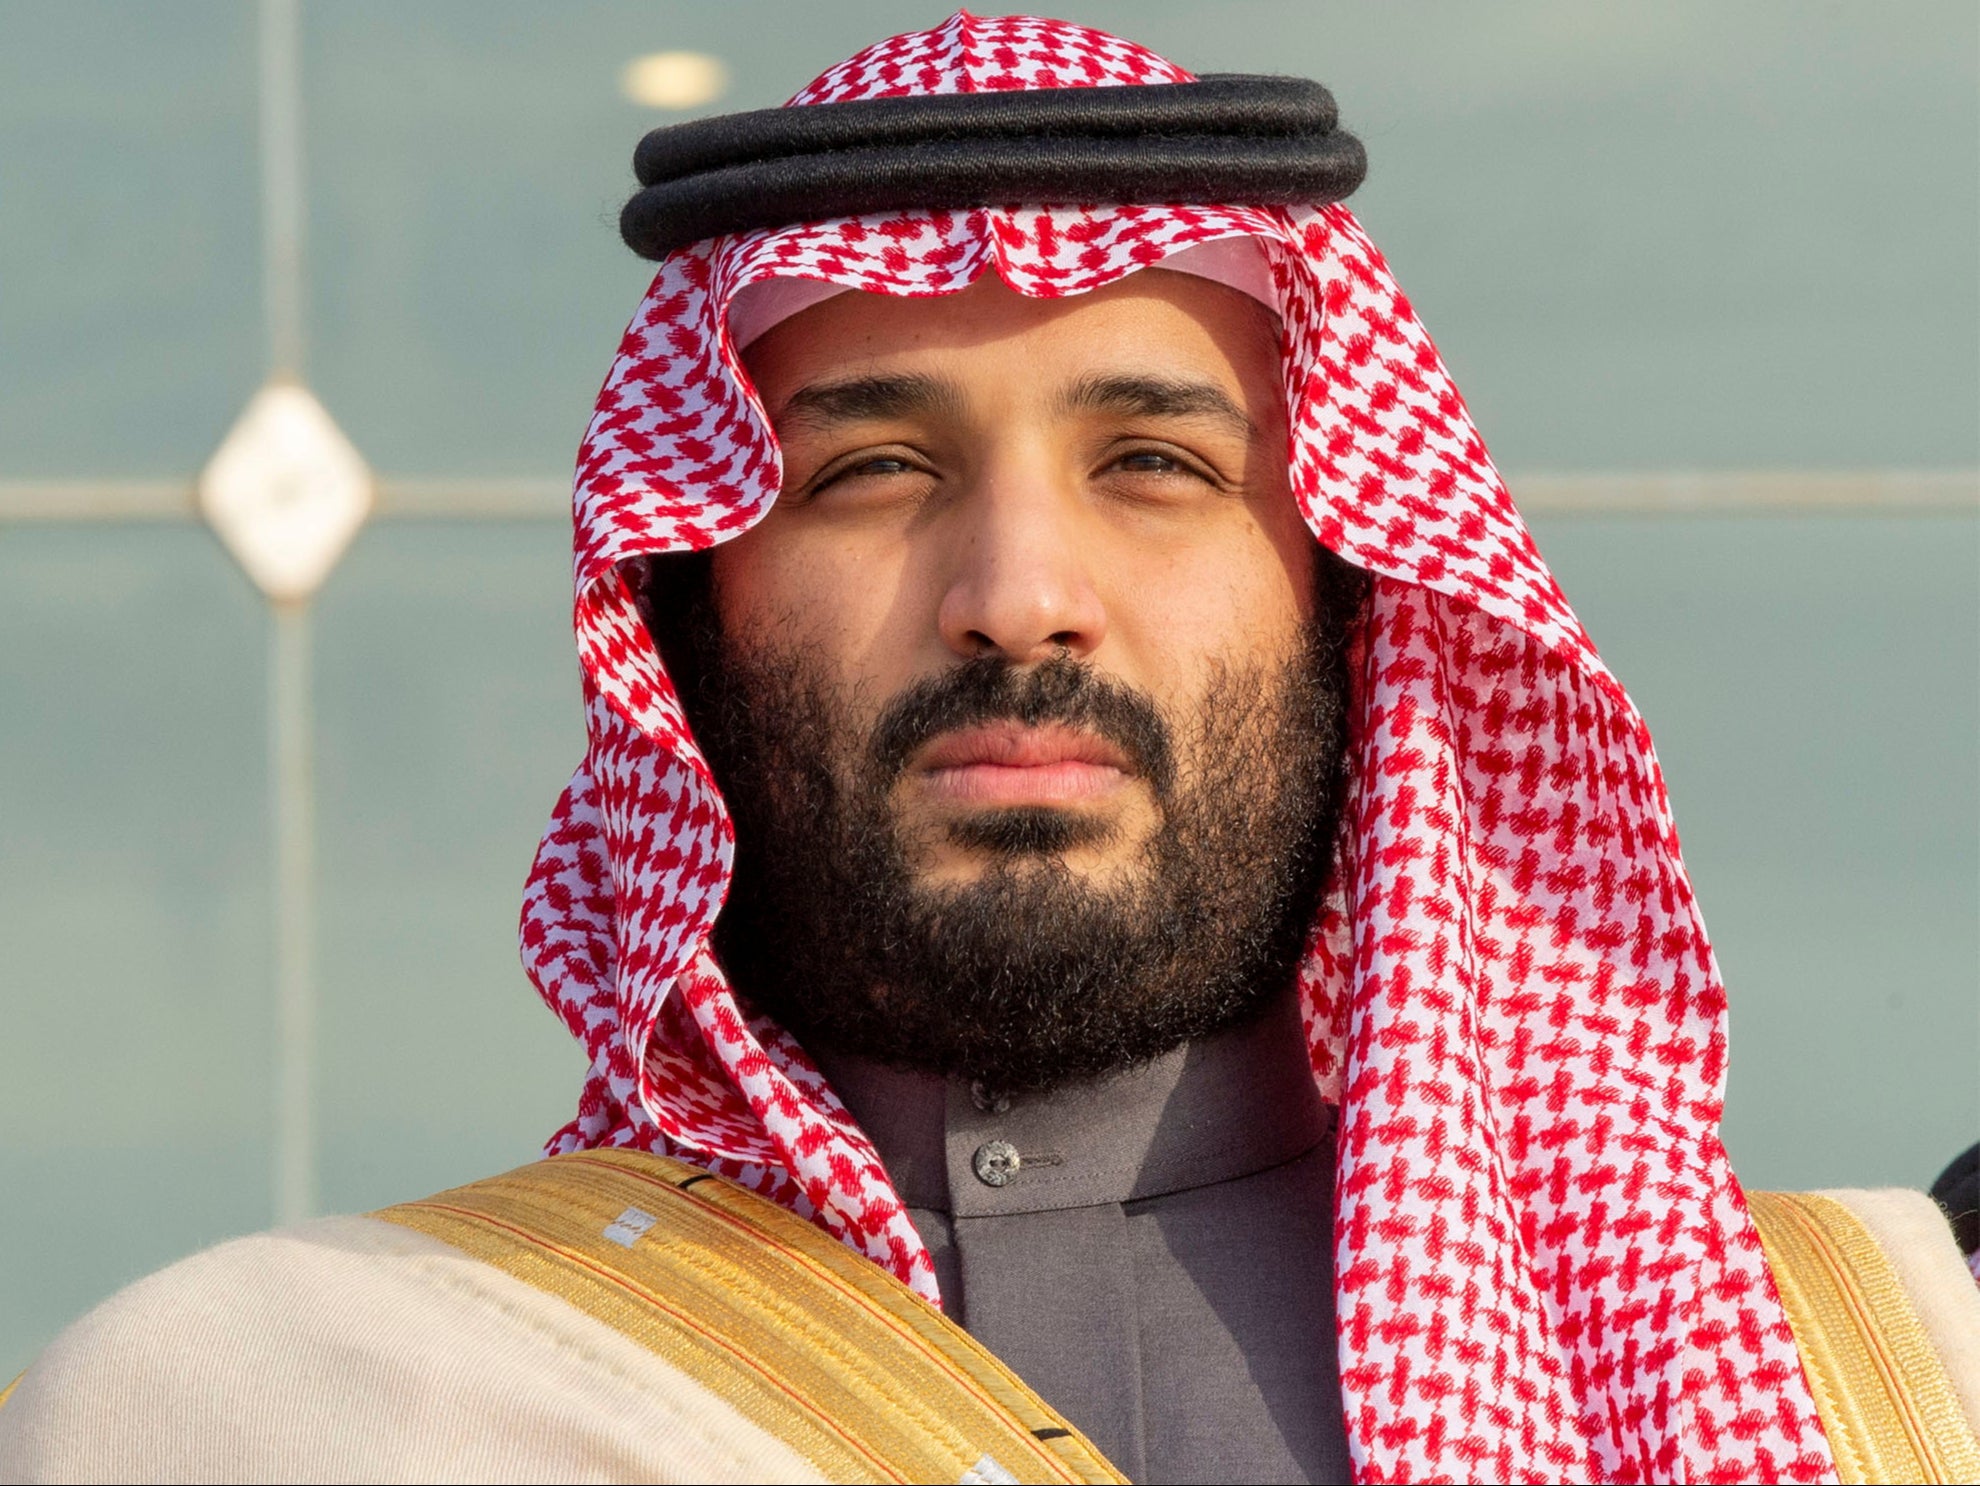 Saudia Arabia’s crown prince and four other officials accused of committing crimes against humanity due to ‘widespread and systematic’ persecution of journalists in the kingdom